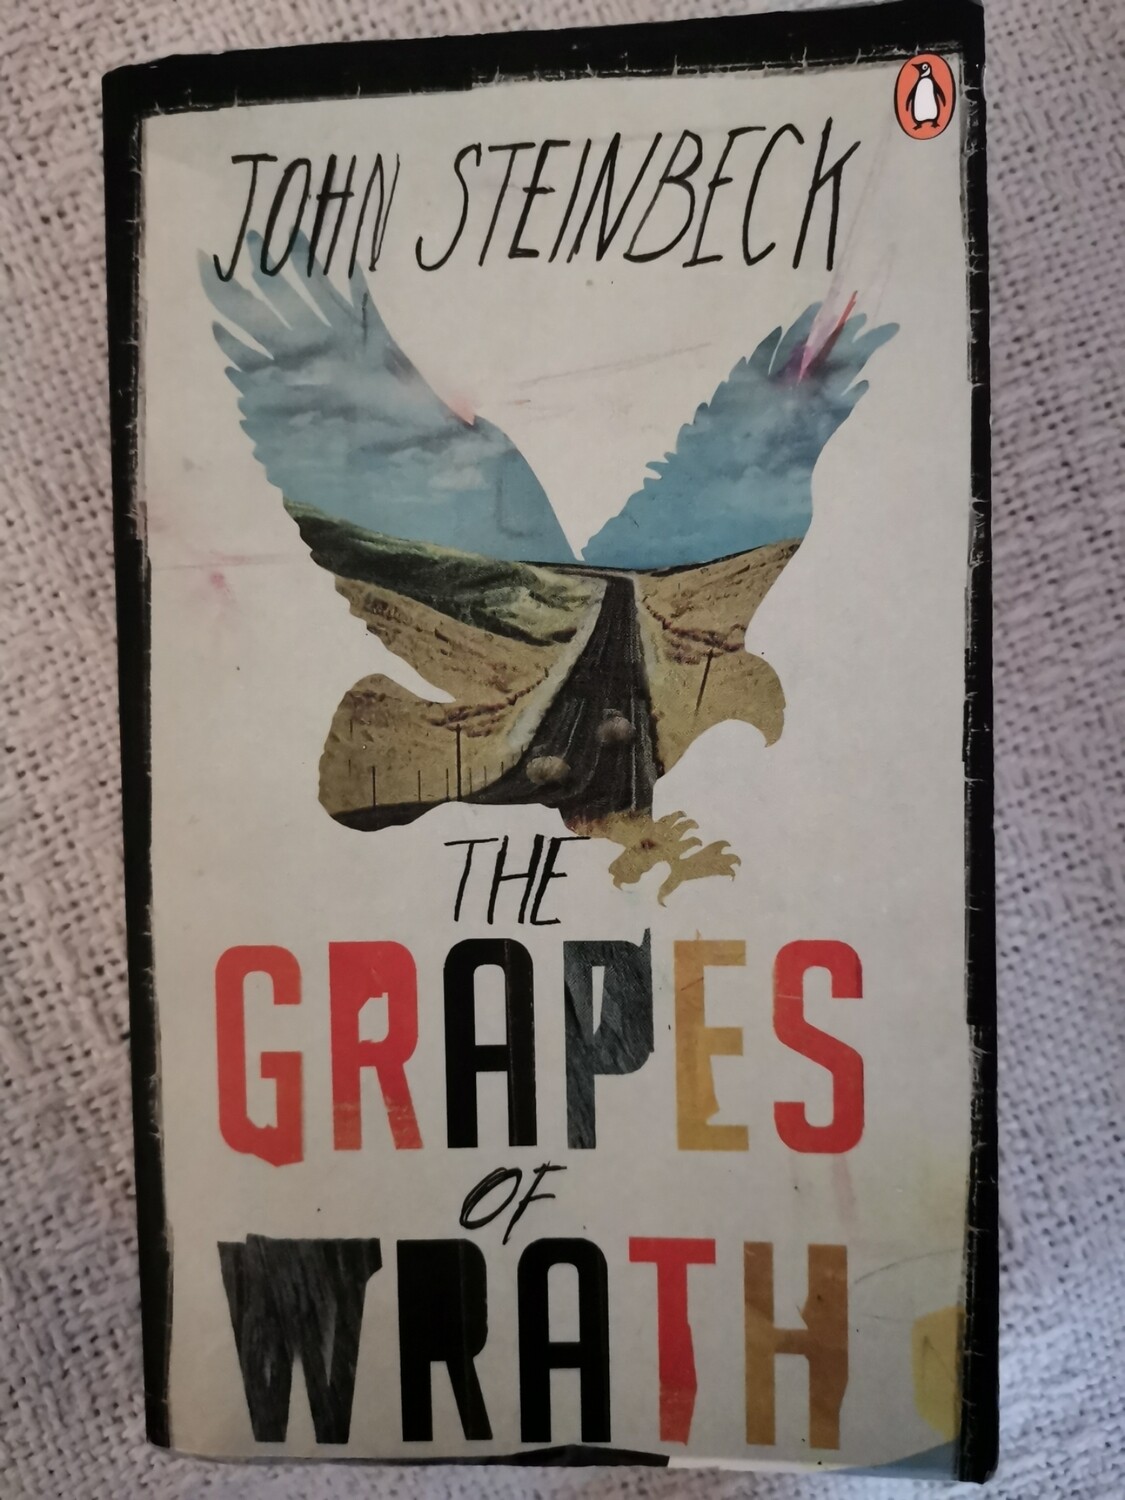 The grapes of wrath, John Steinbeck